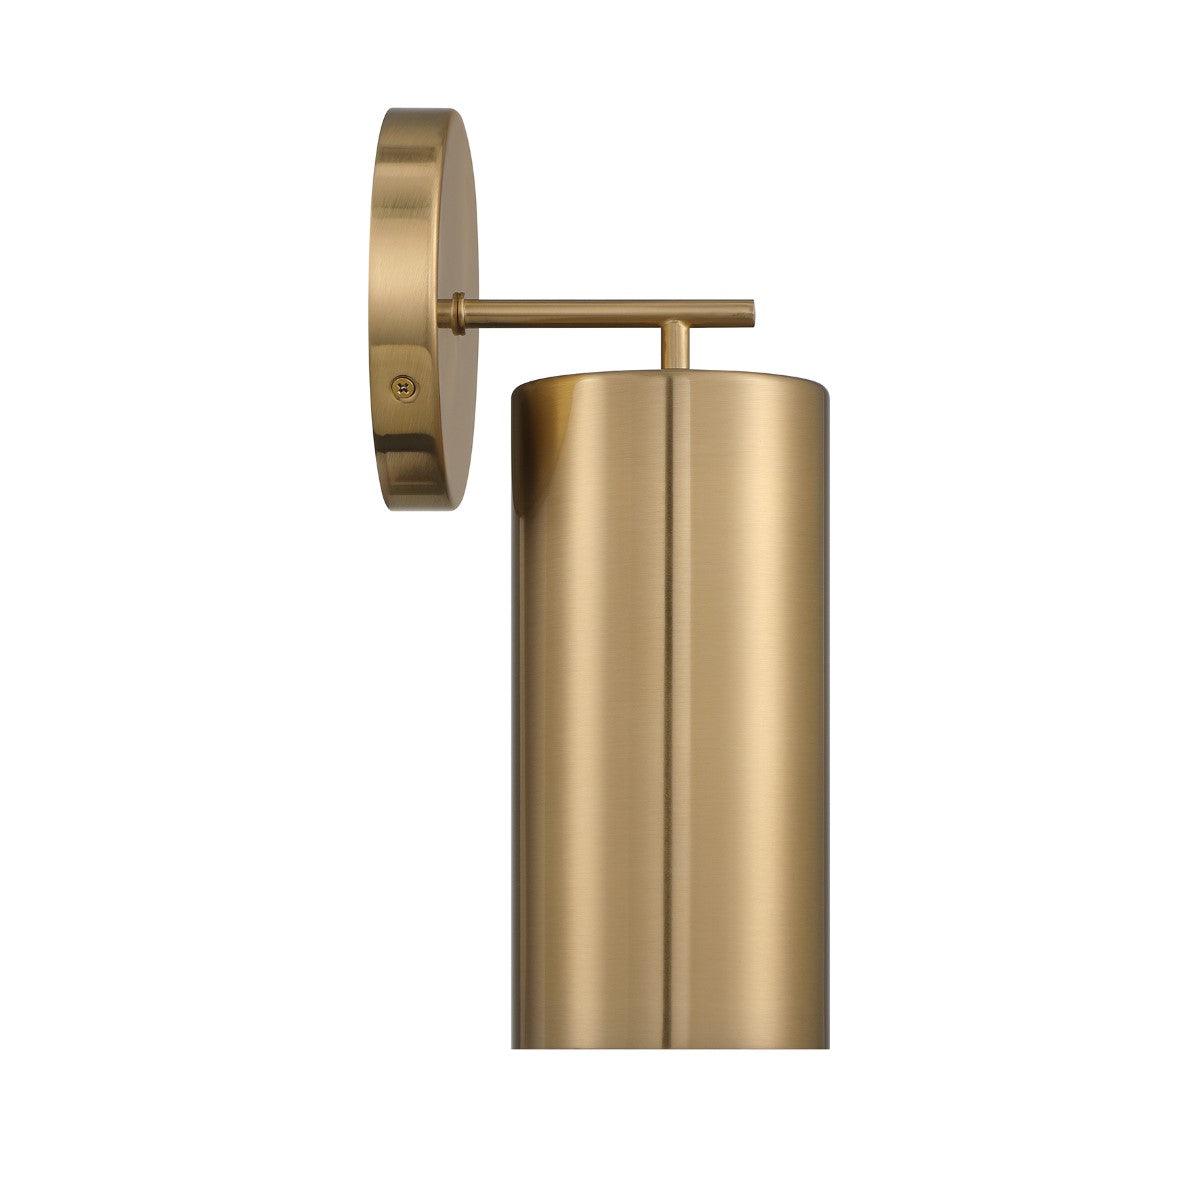 Lio 12 in. Armed Sconce Noble Brass Finish